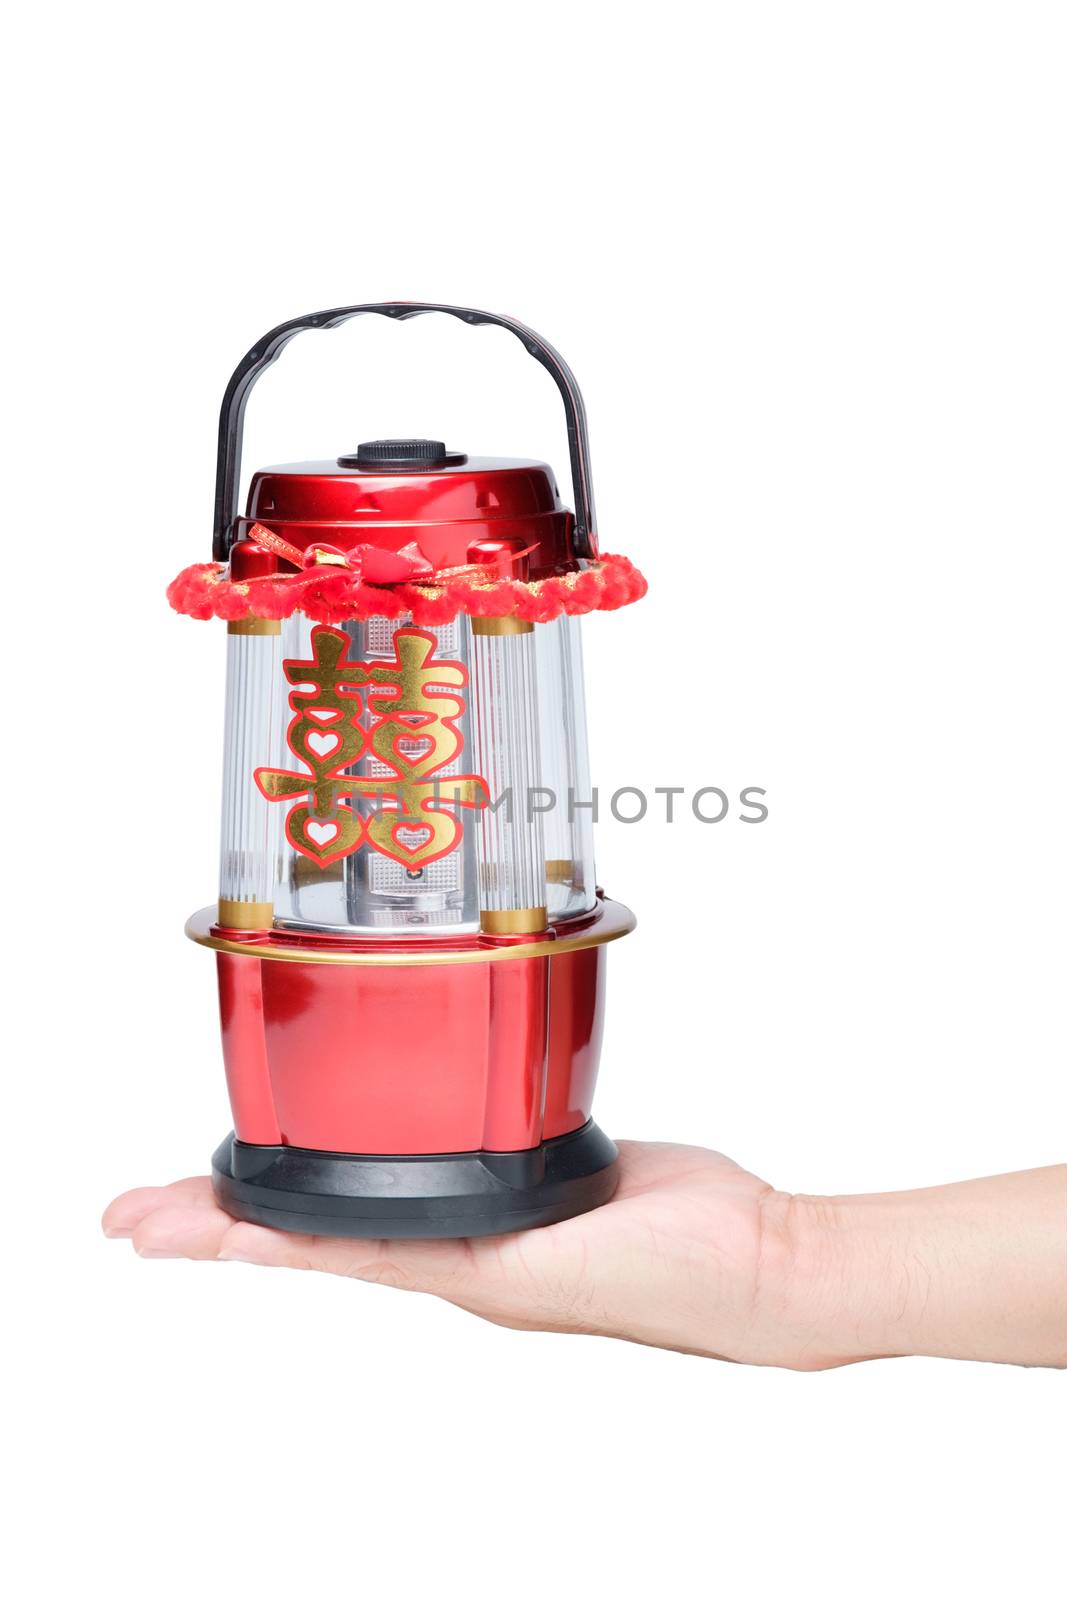 Hand holding Chinese LED lantern lamp with golden Chinese double happiness symbol sign called "shuang xi"